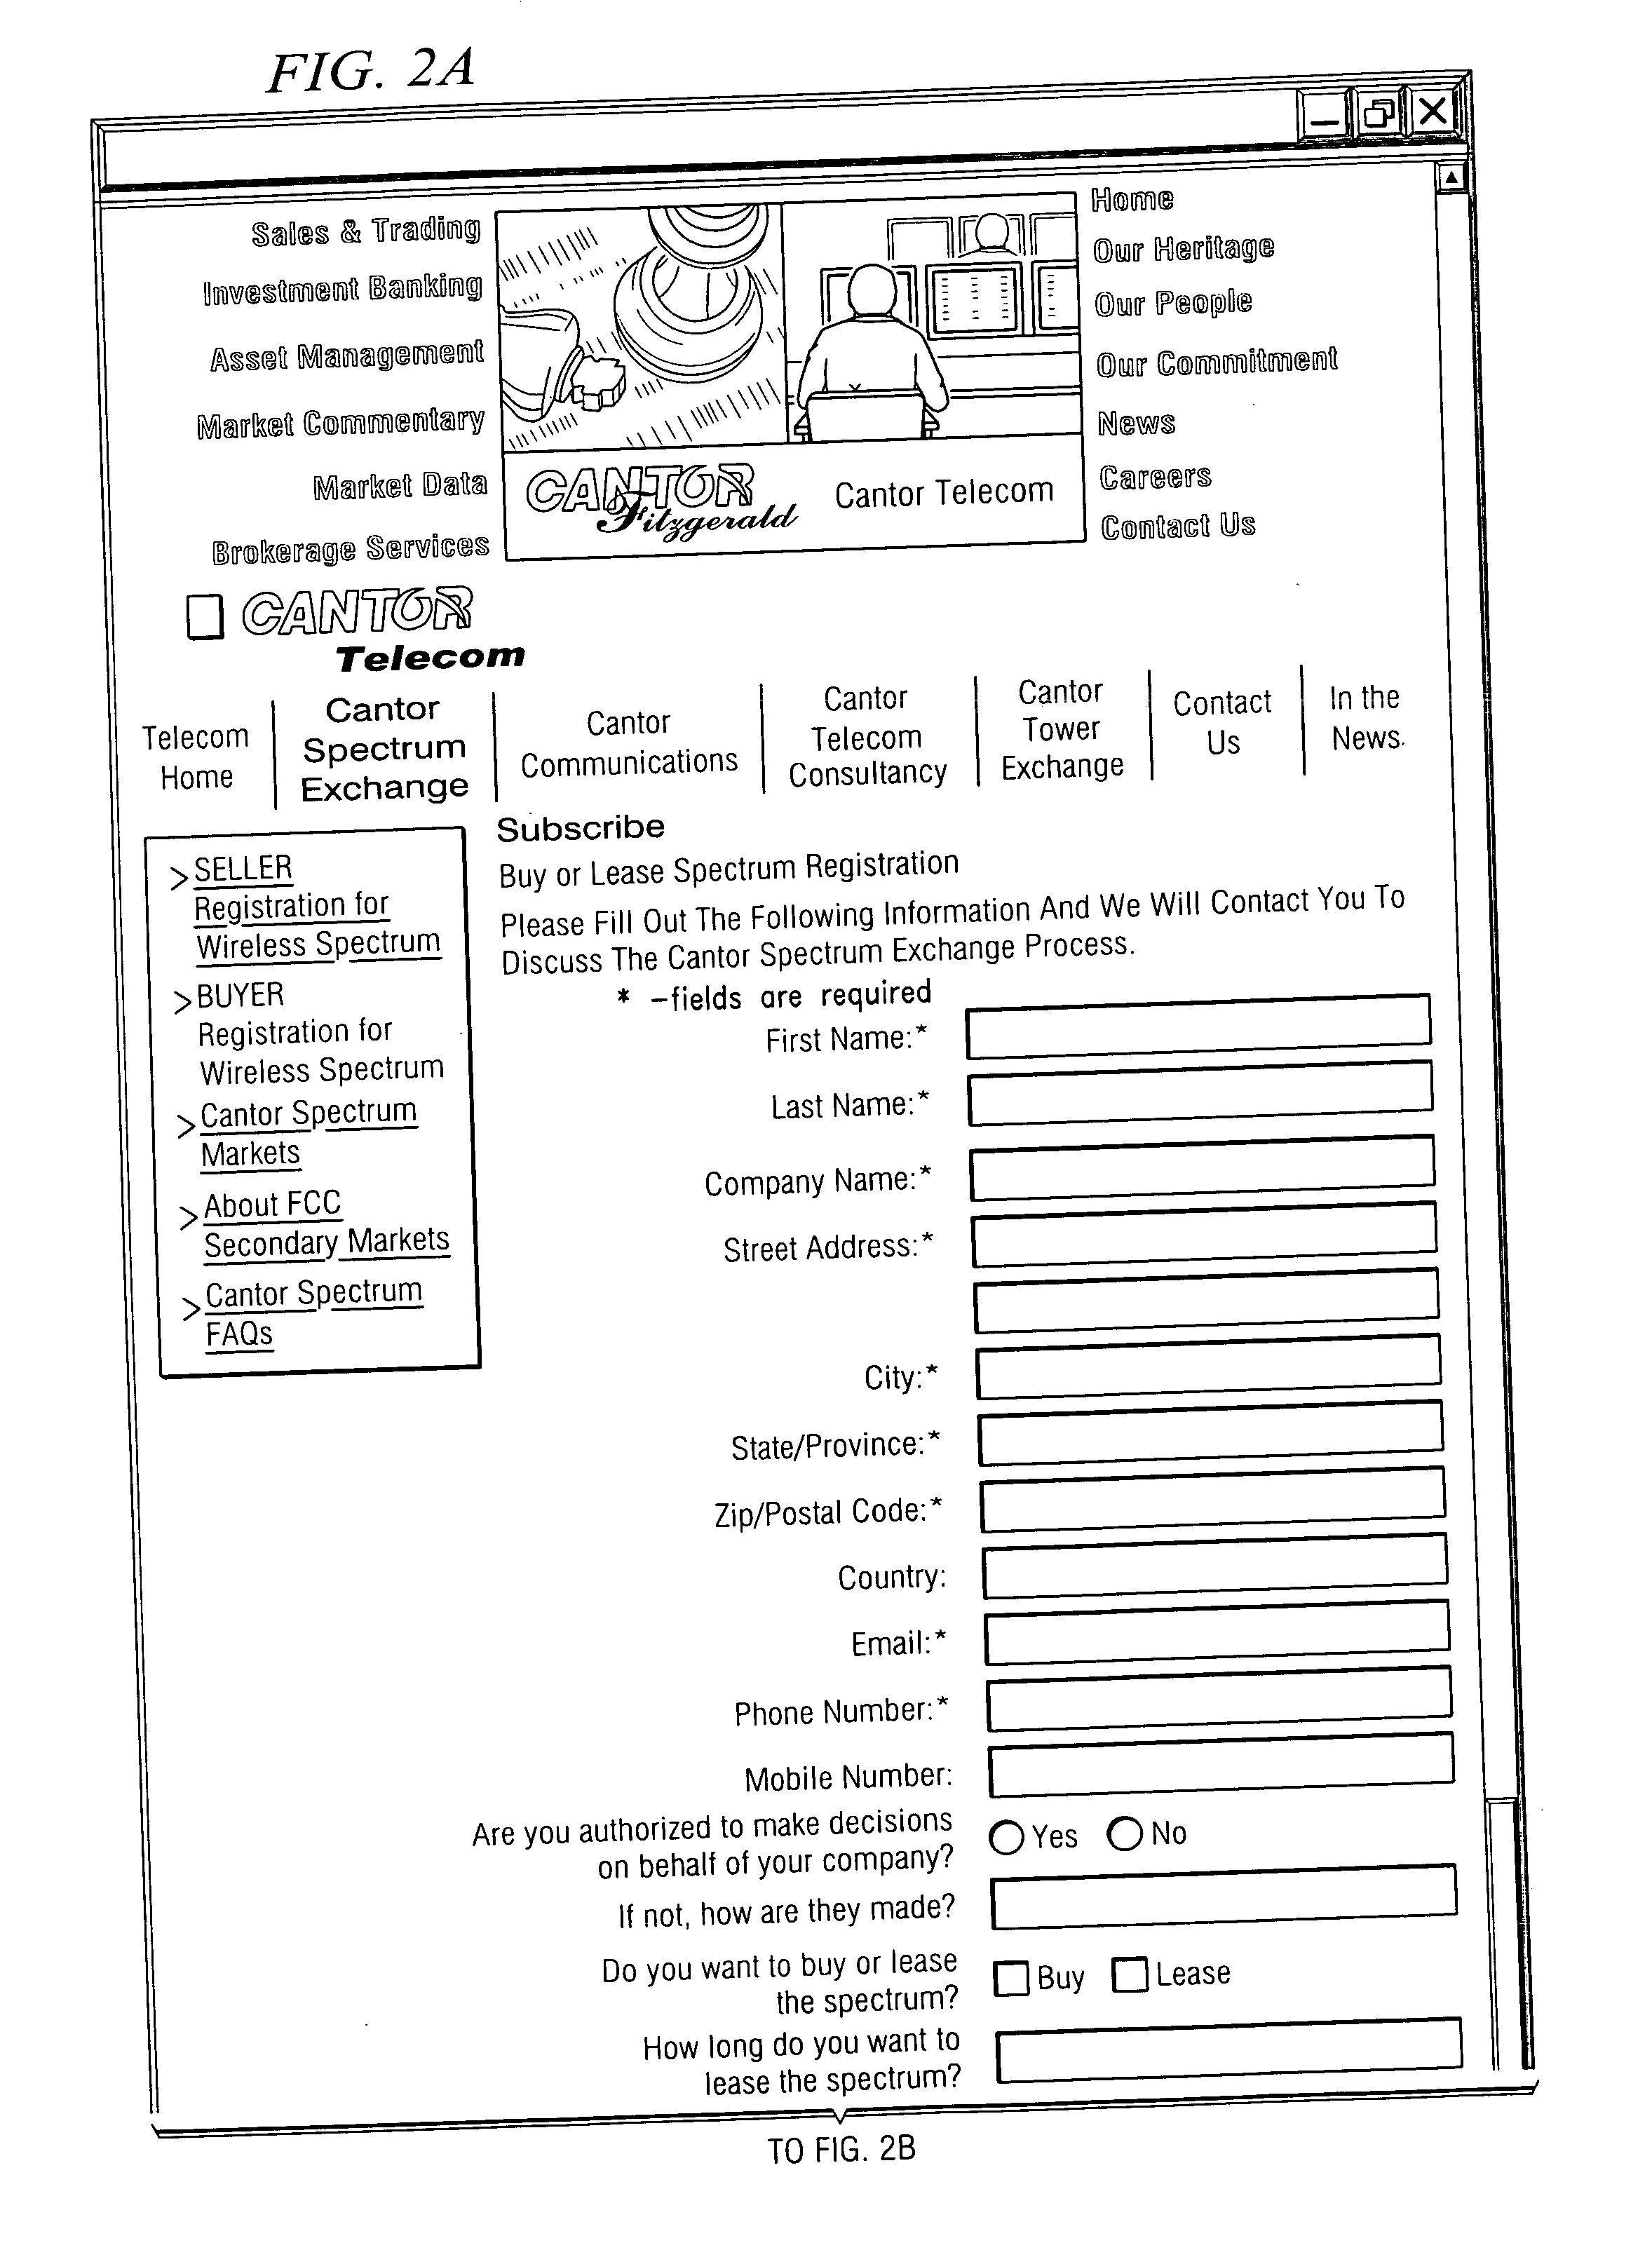 System and method for trading spectrum rights